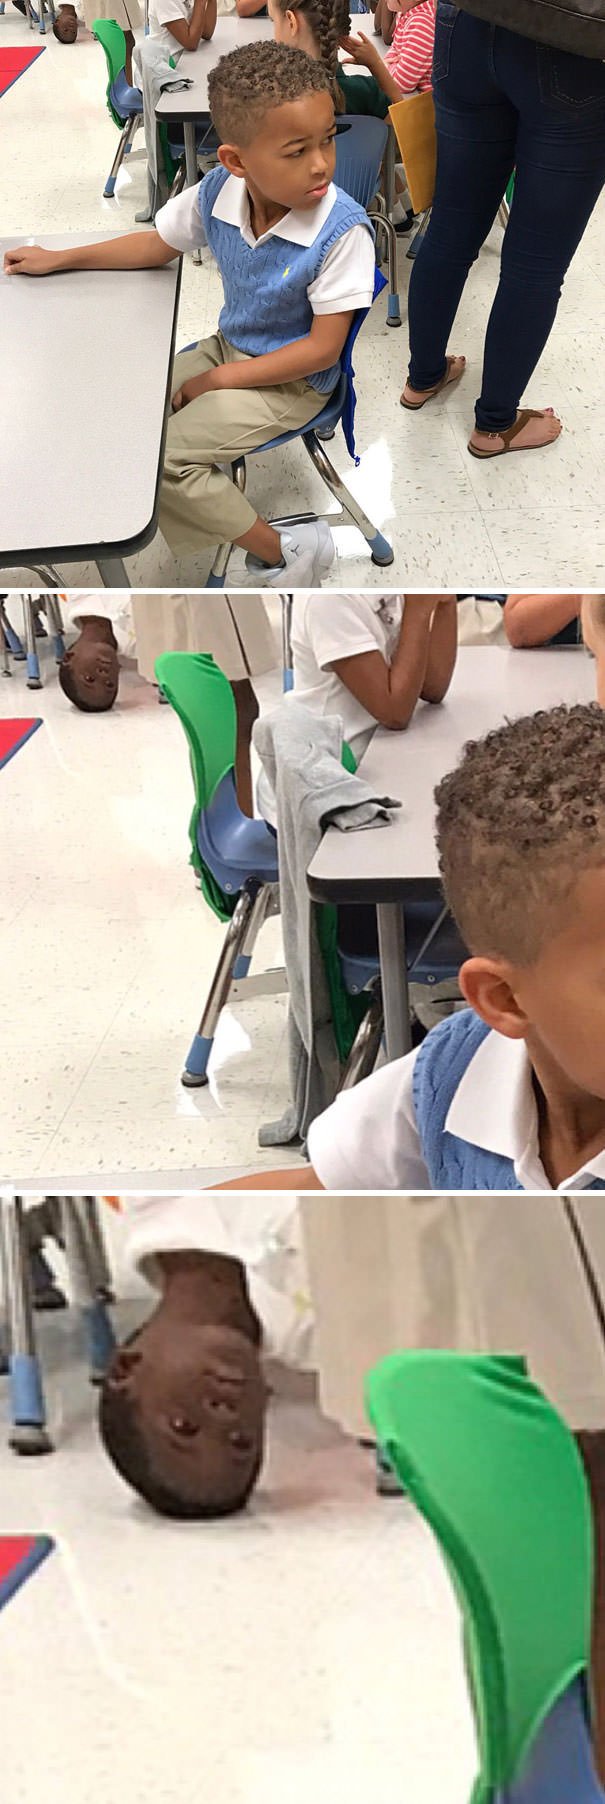 My Sister Was Taking Pictures Of My Nephew At School & The Little Guy In The Back Looks Miserable